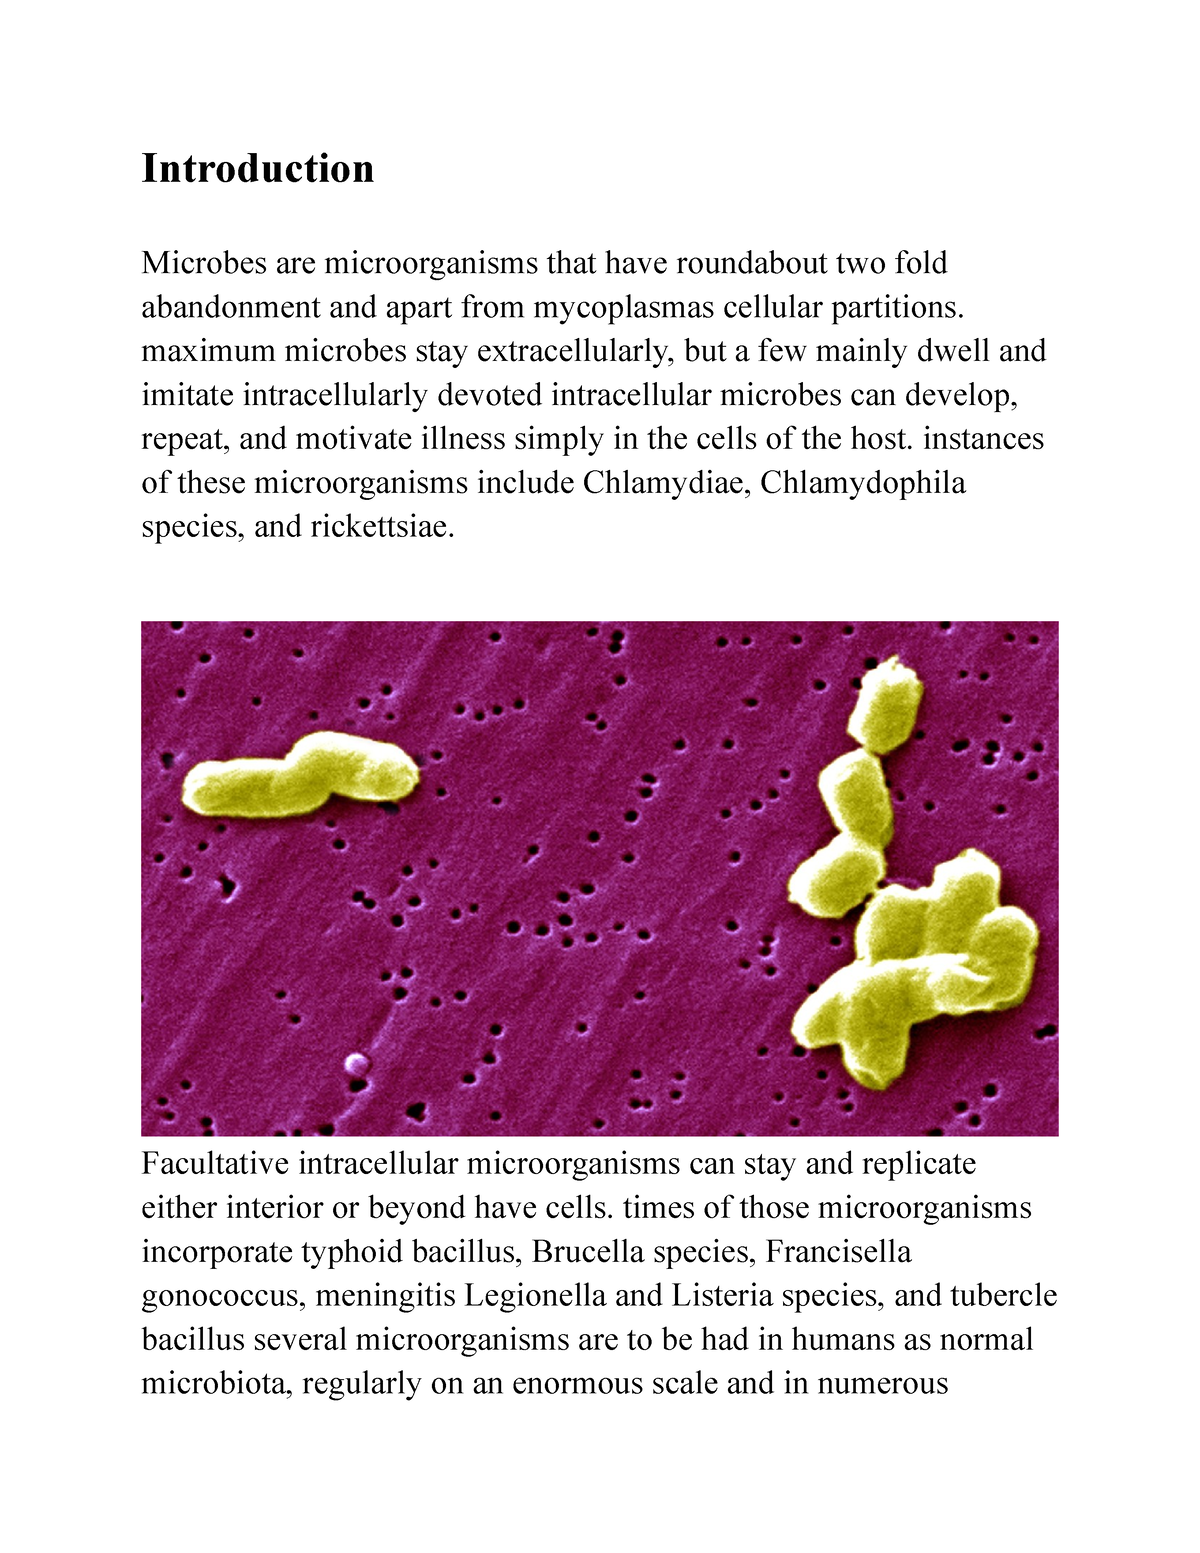 Streptococcus pneumonia - Introduction Microbes are microorganisms that ...